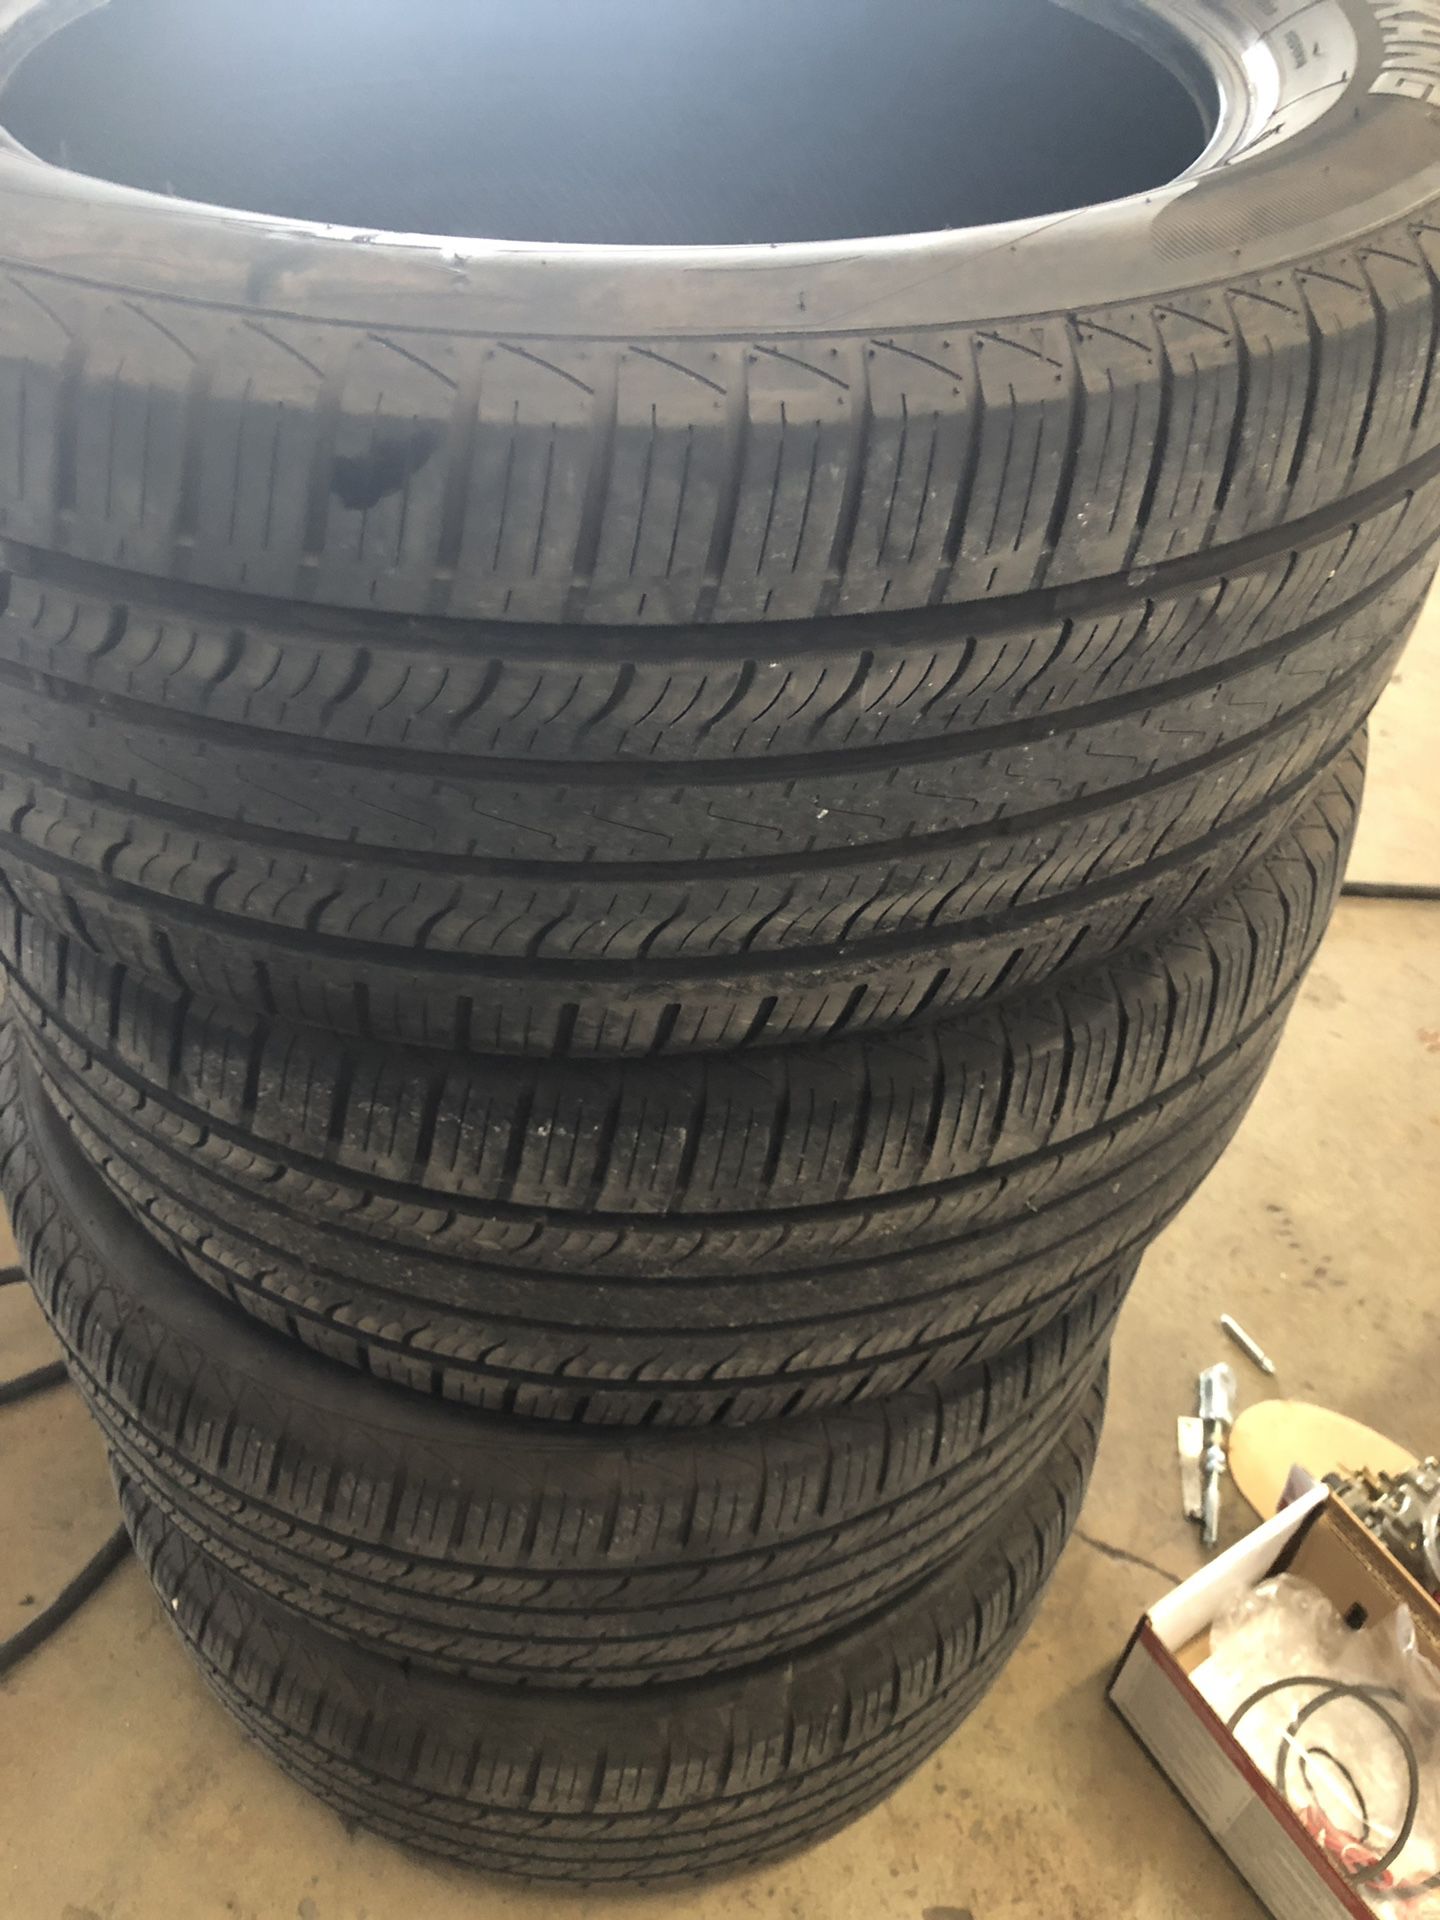 285-50-20 tires good shape cleaning out garage